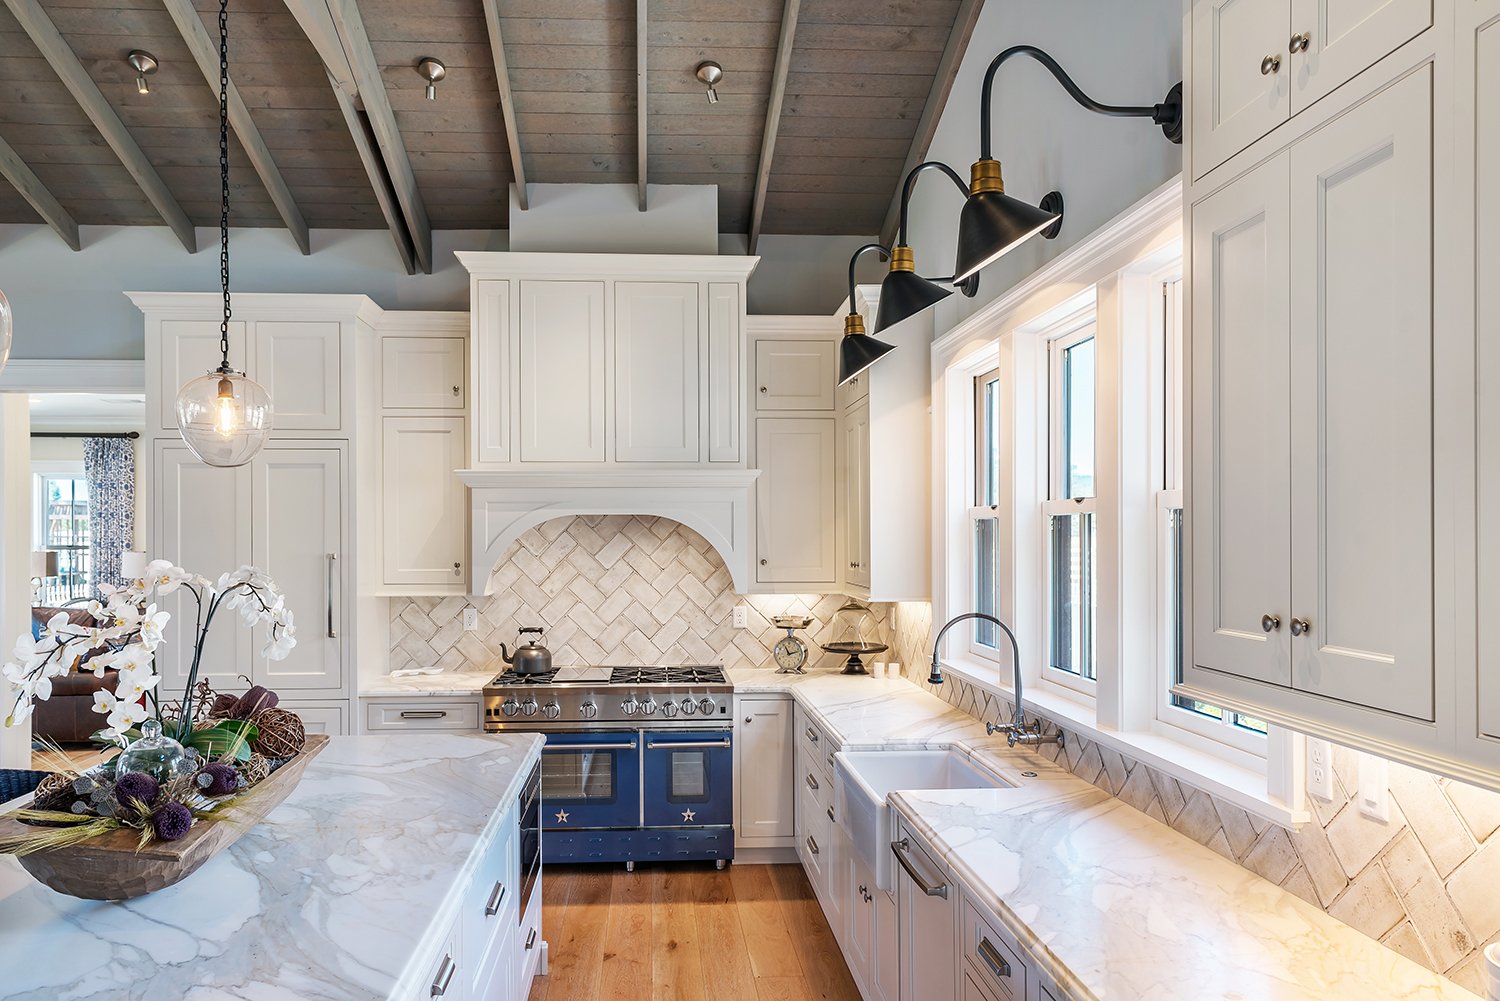  A kitchen with off-white angled tiled backsplash, wood flooring, white cabinets, and a statement blue range.  